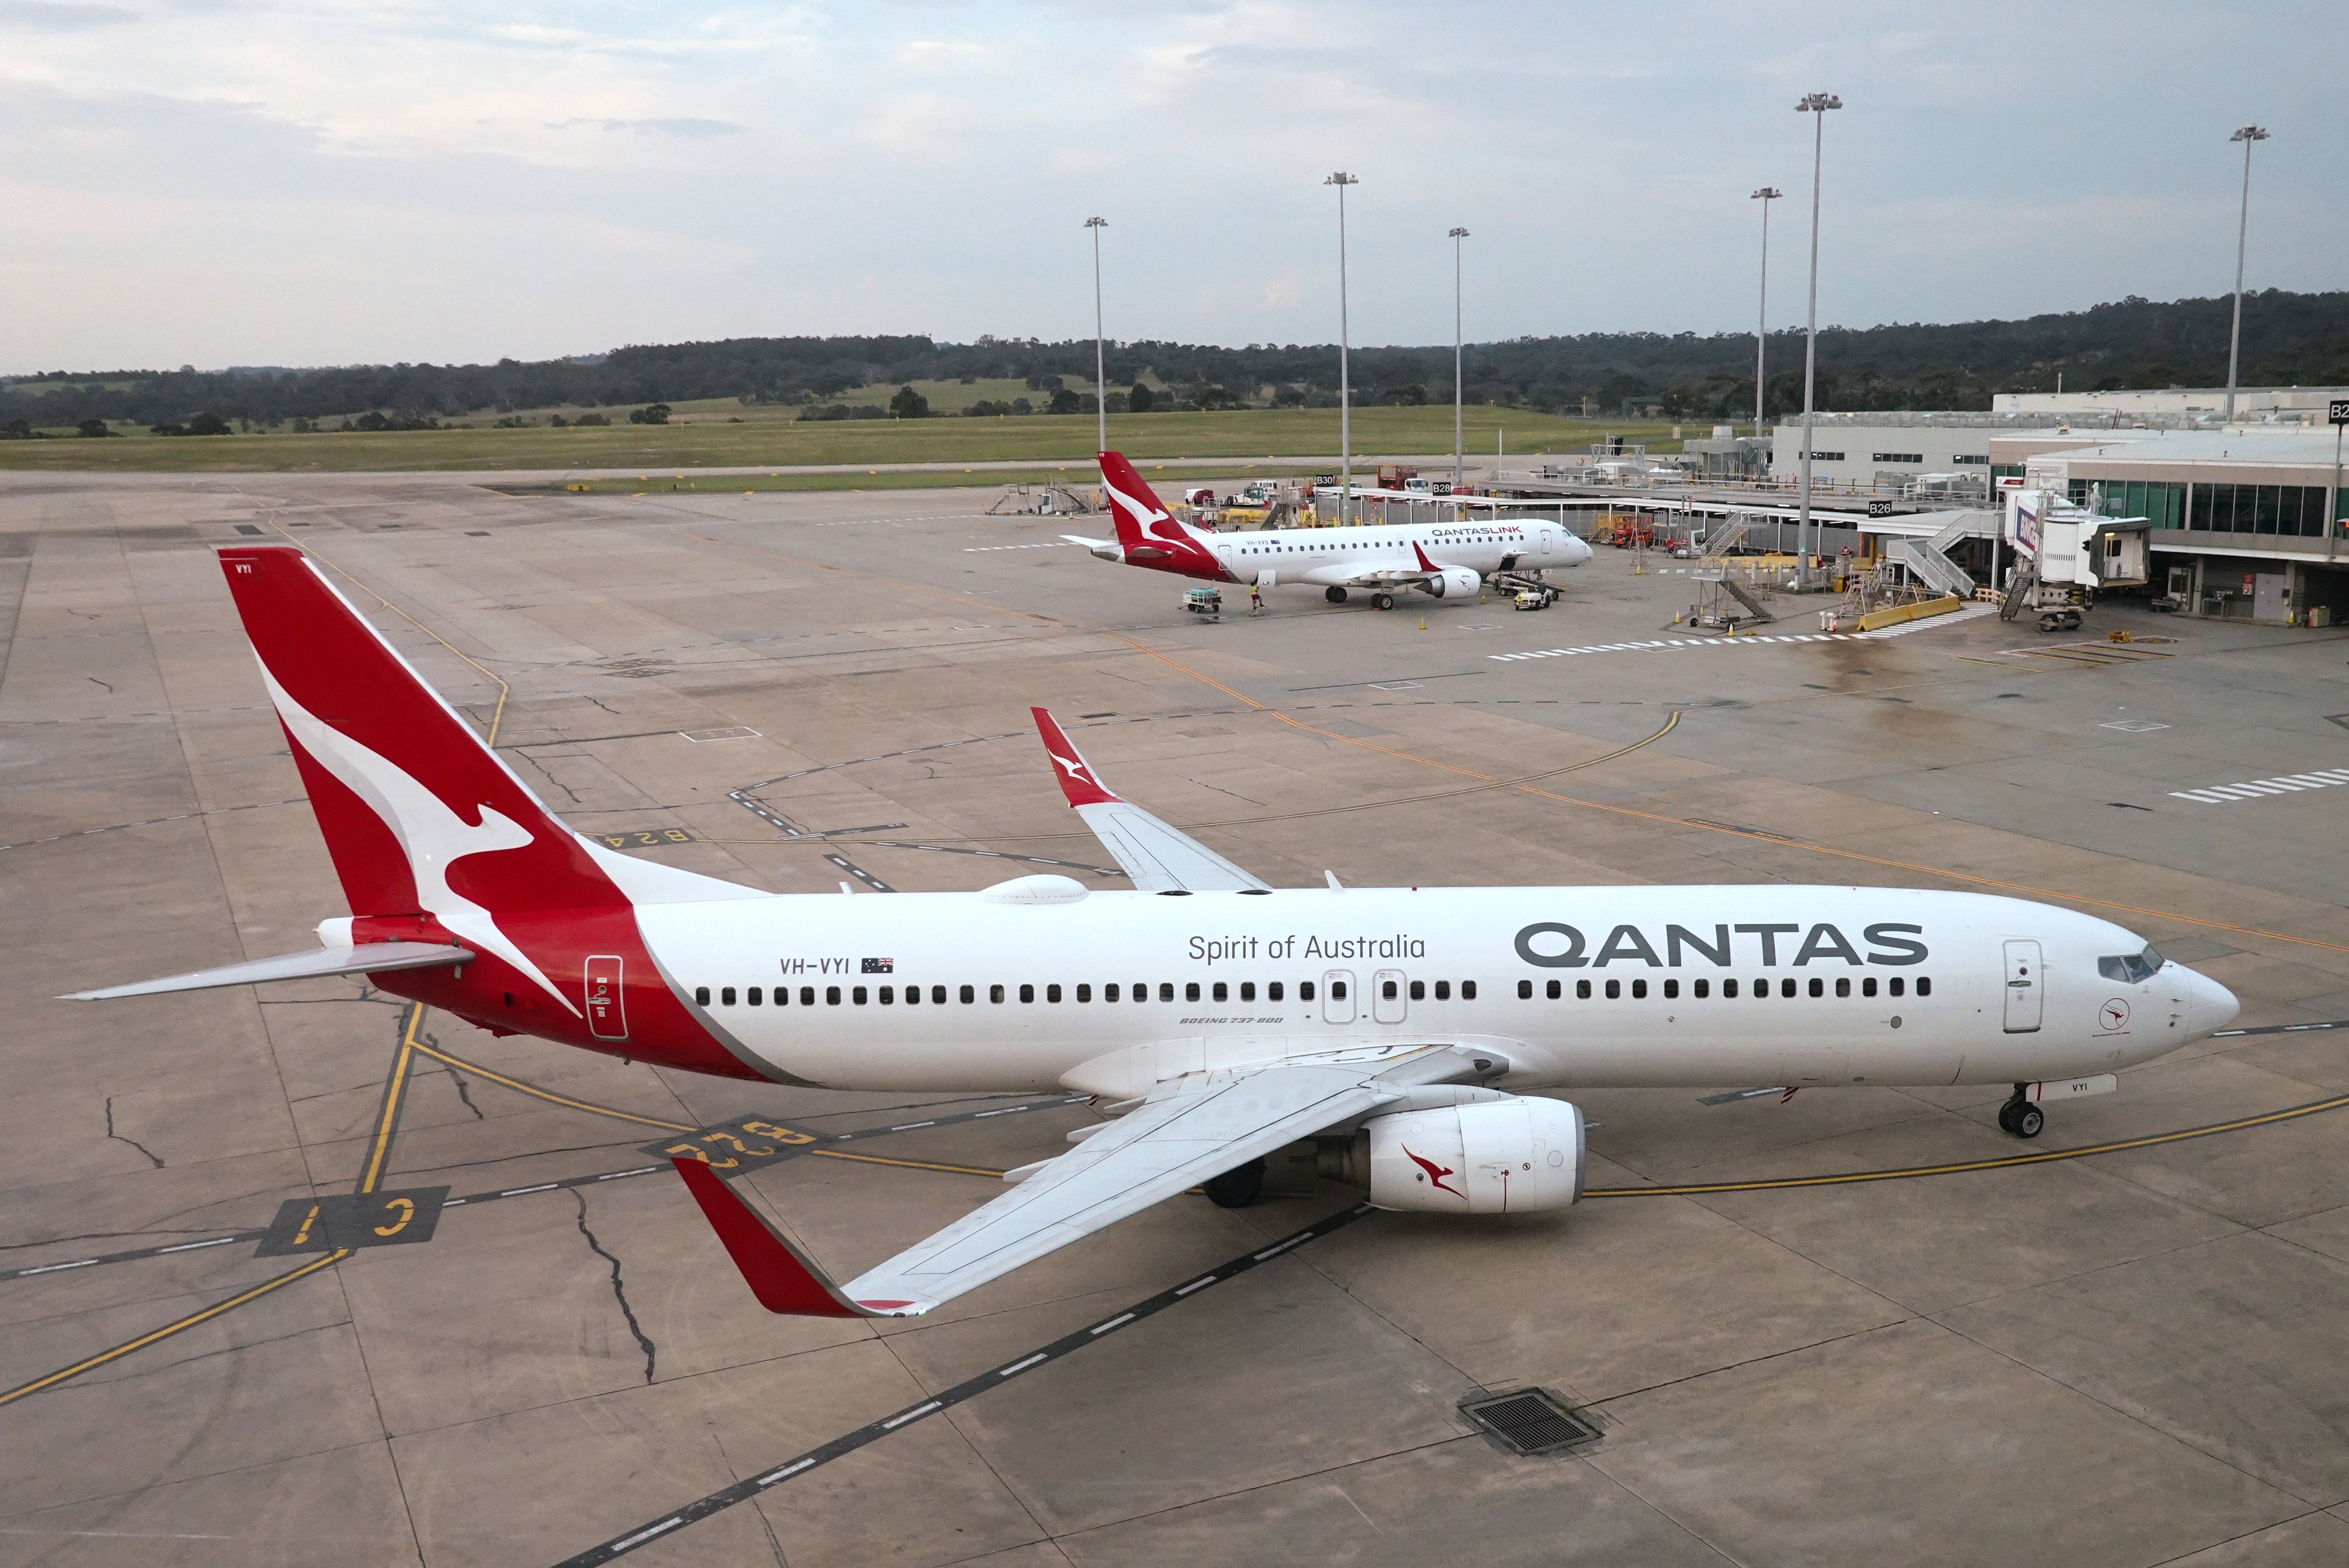 Qantas aircraft on the Shanghai route will be redirected elsewhere in Asia